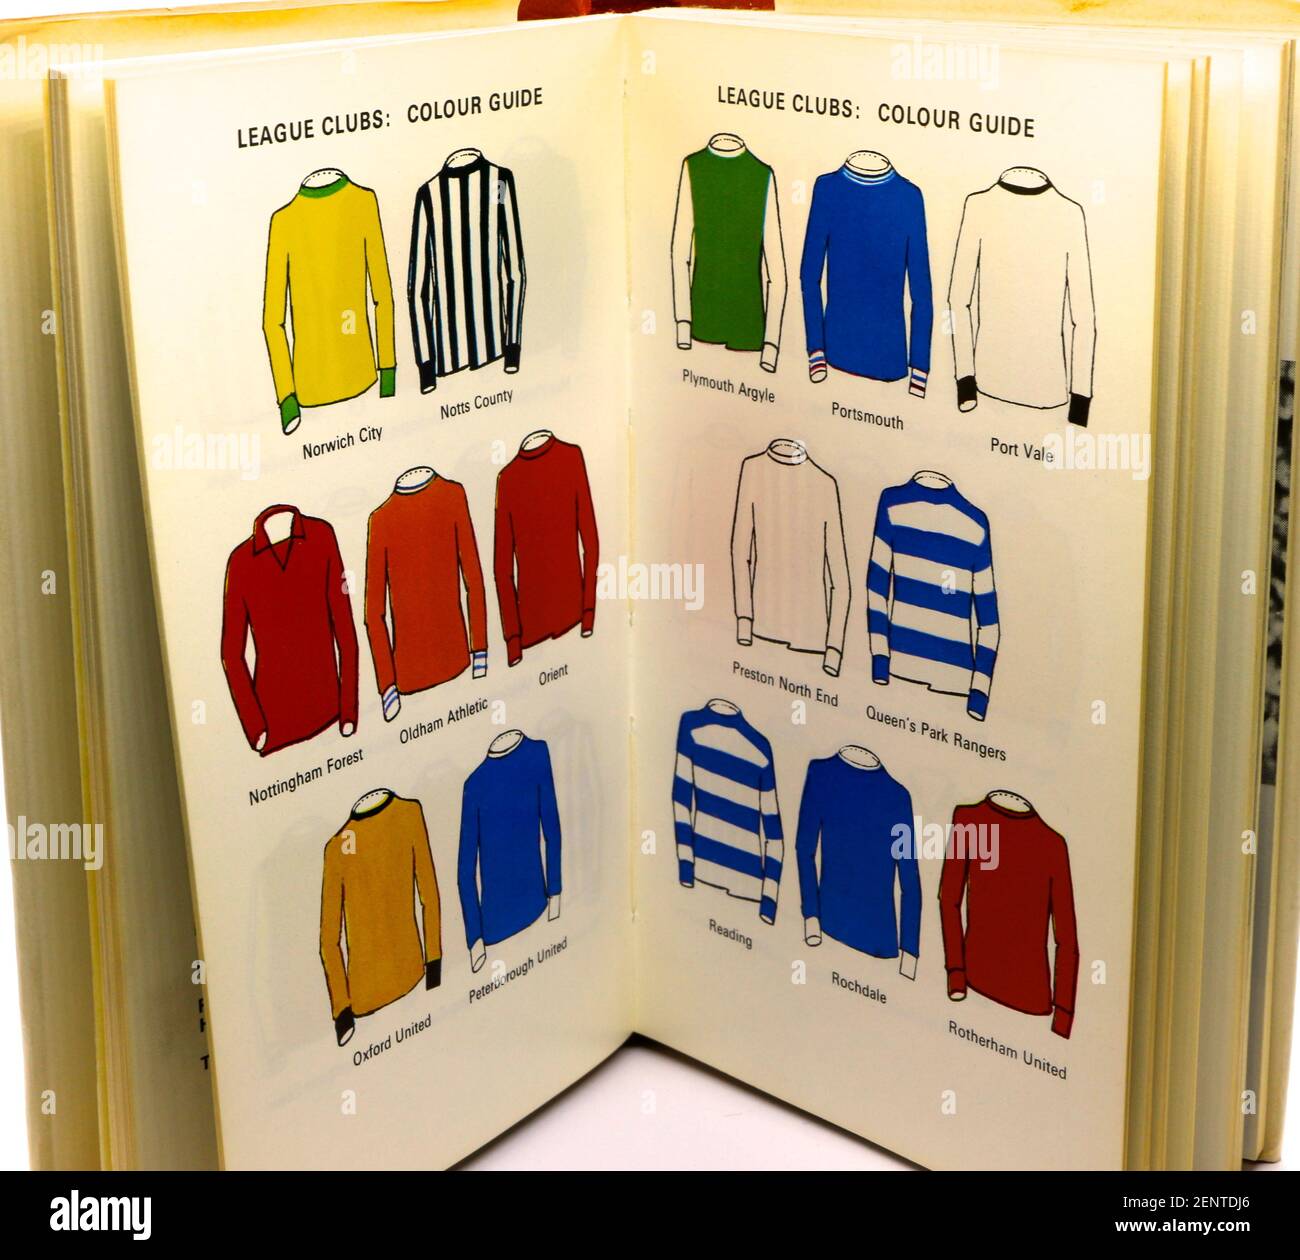 The Observers Book of Association Football compiled by Albert Sewell from 1972 open at pages showing the shirt colour guide for 15 teams Stock Photo